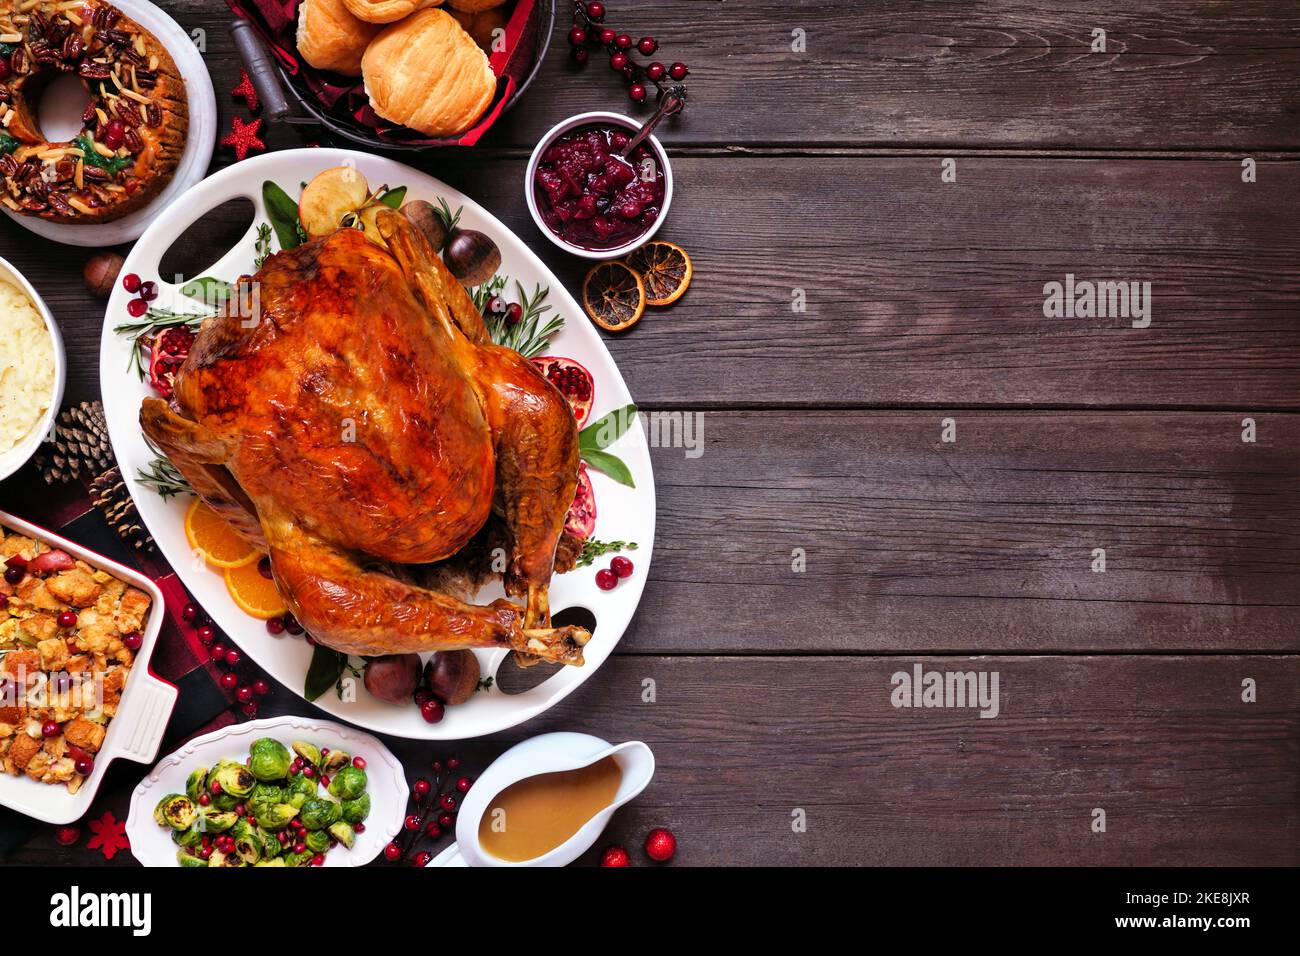 Traditional Christmas turkey dinner. Top down view side border on a dark wood banner background. Turkey with sides, dressing and fruit cake. Stock Photo